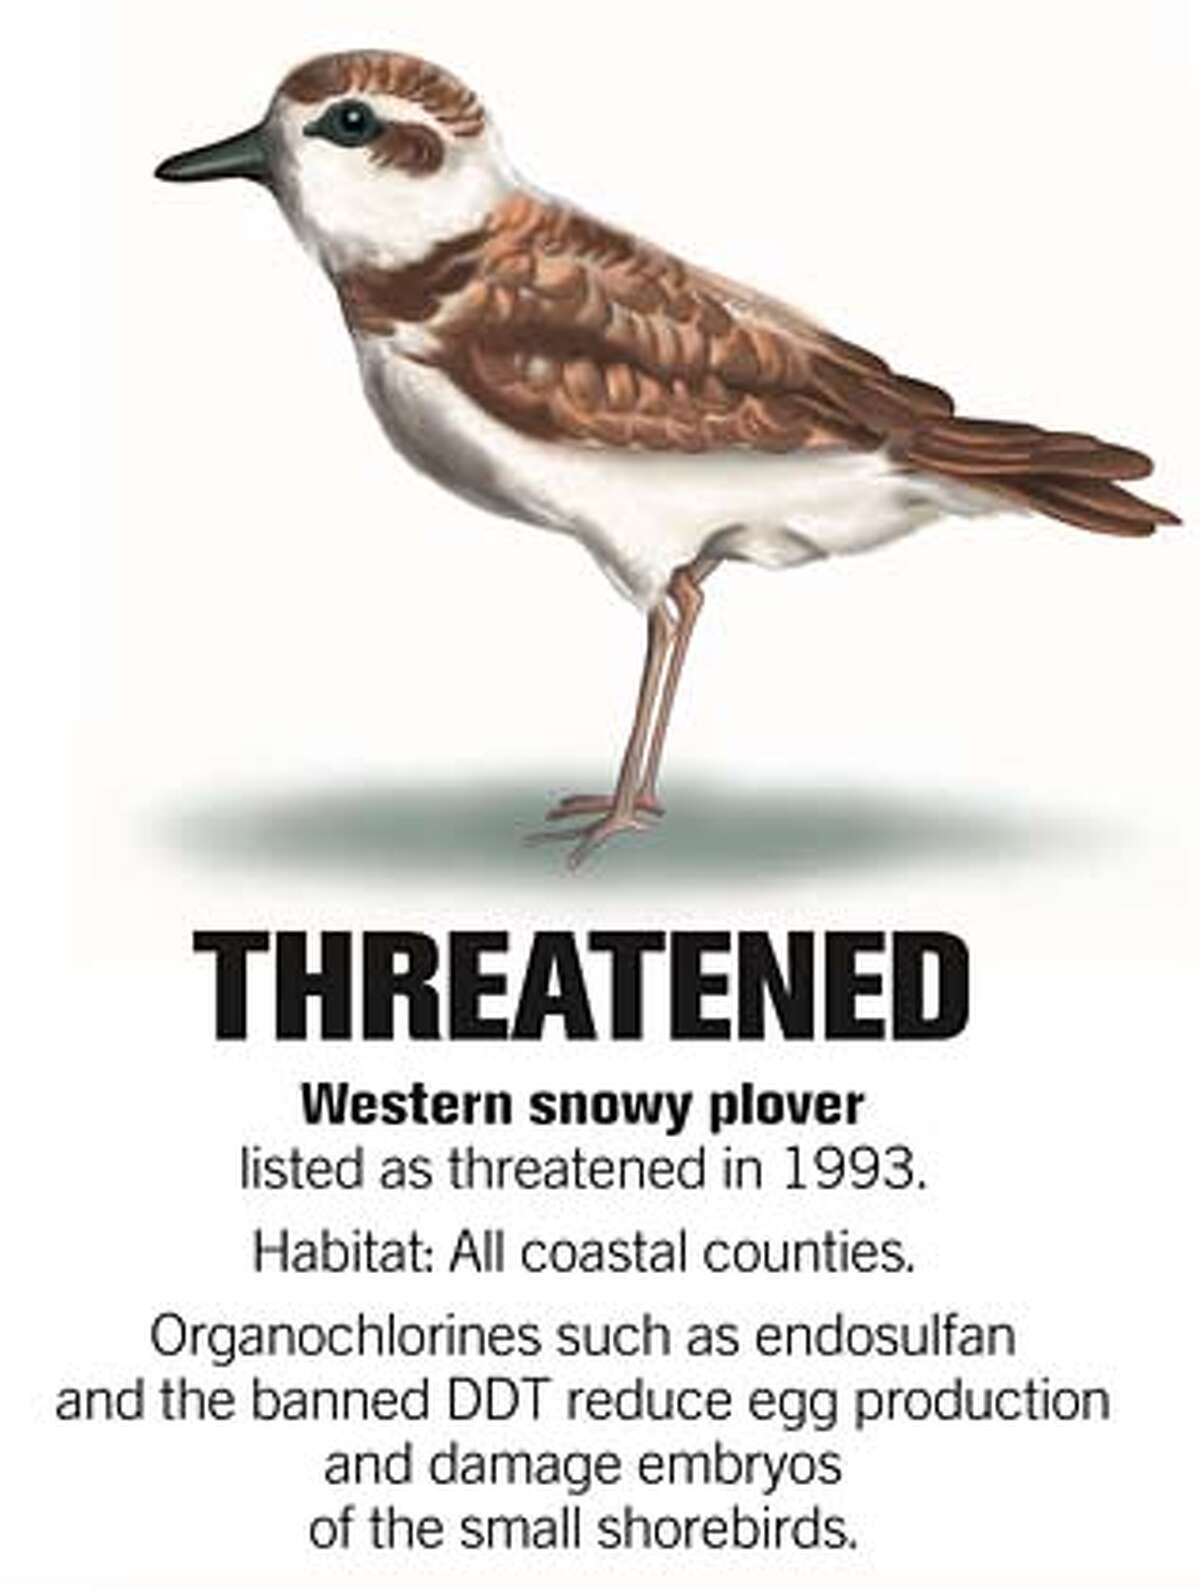 Western snowy plover. Source: Center for Biological Diversity. Chronicle illustration by John Blanchard